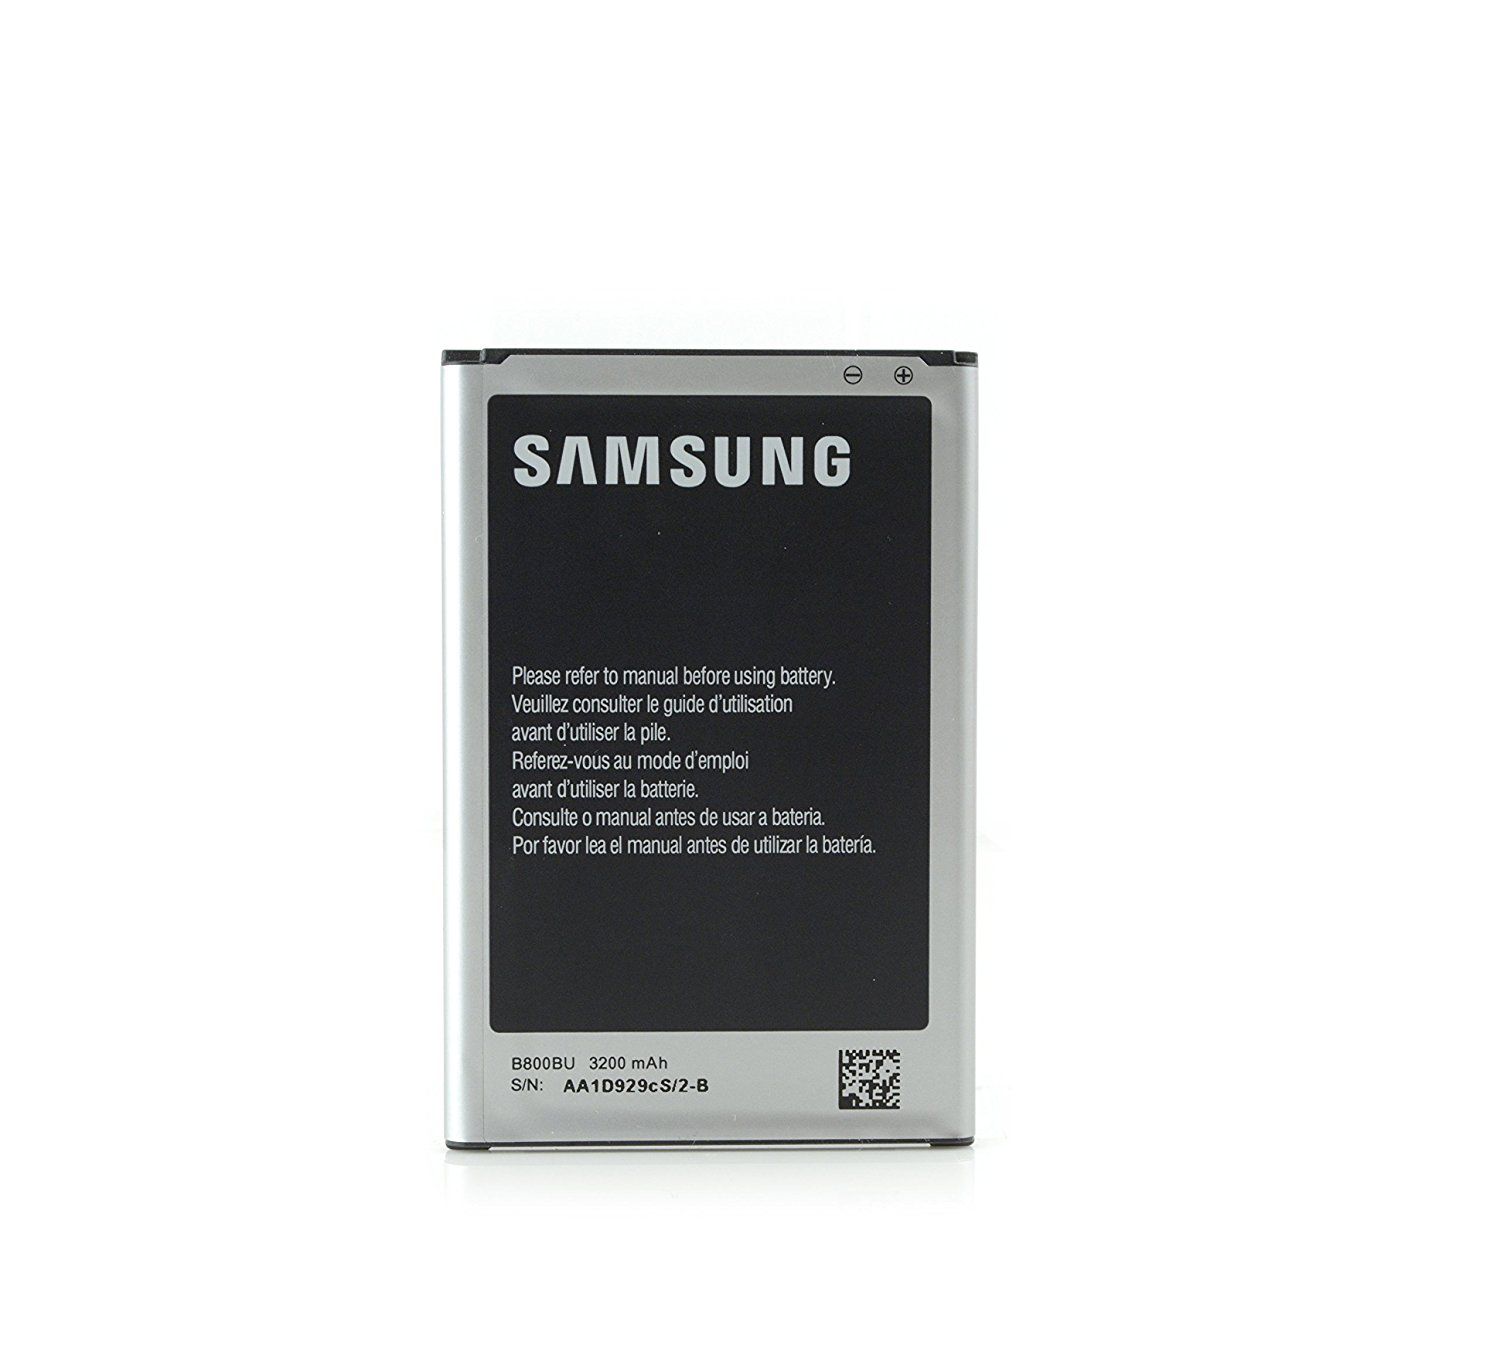 Samsung Galaxy Note 3 3200 mAh Battery by OVER TECH ...